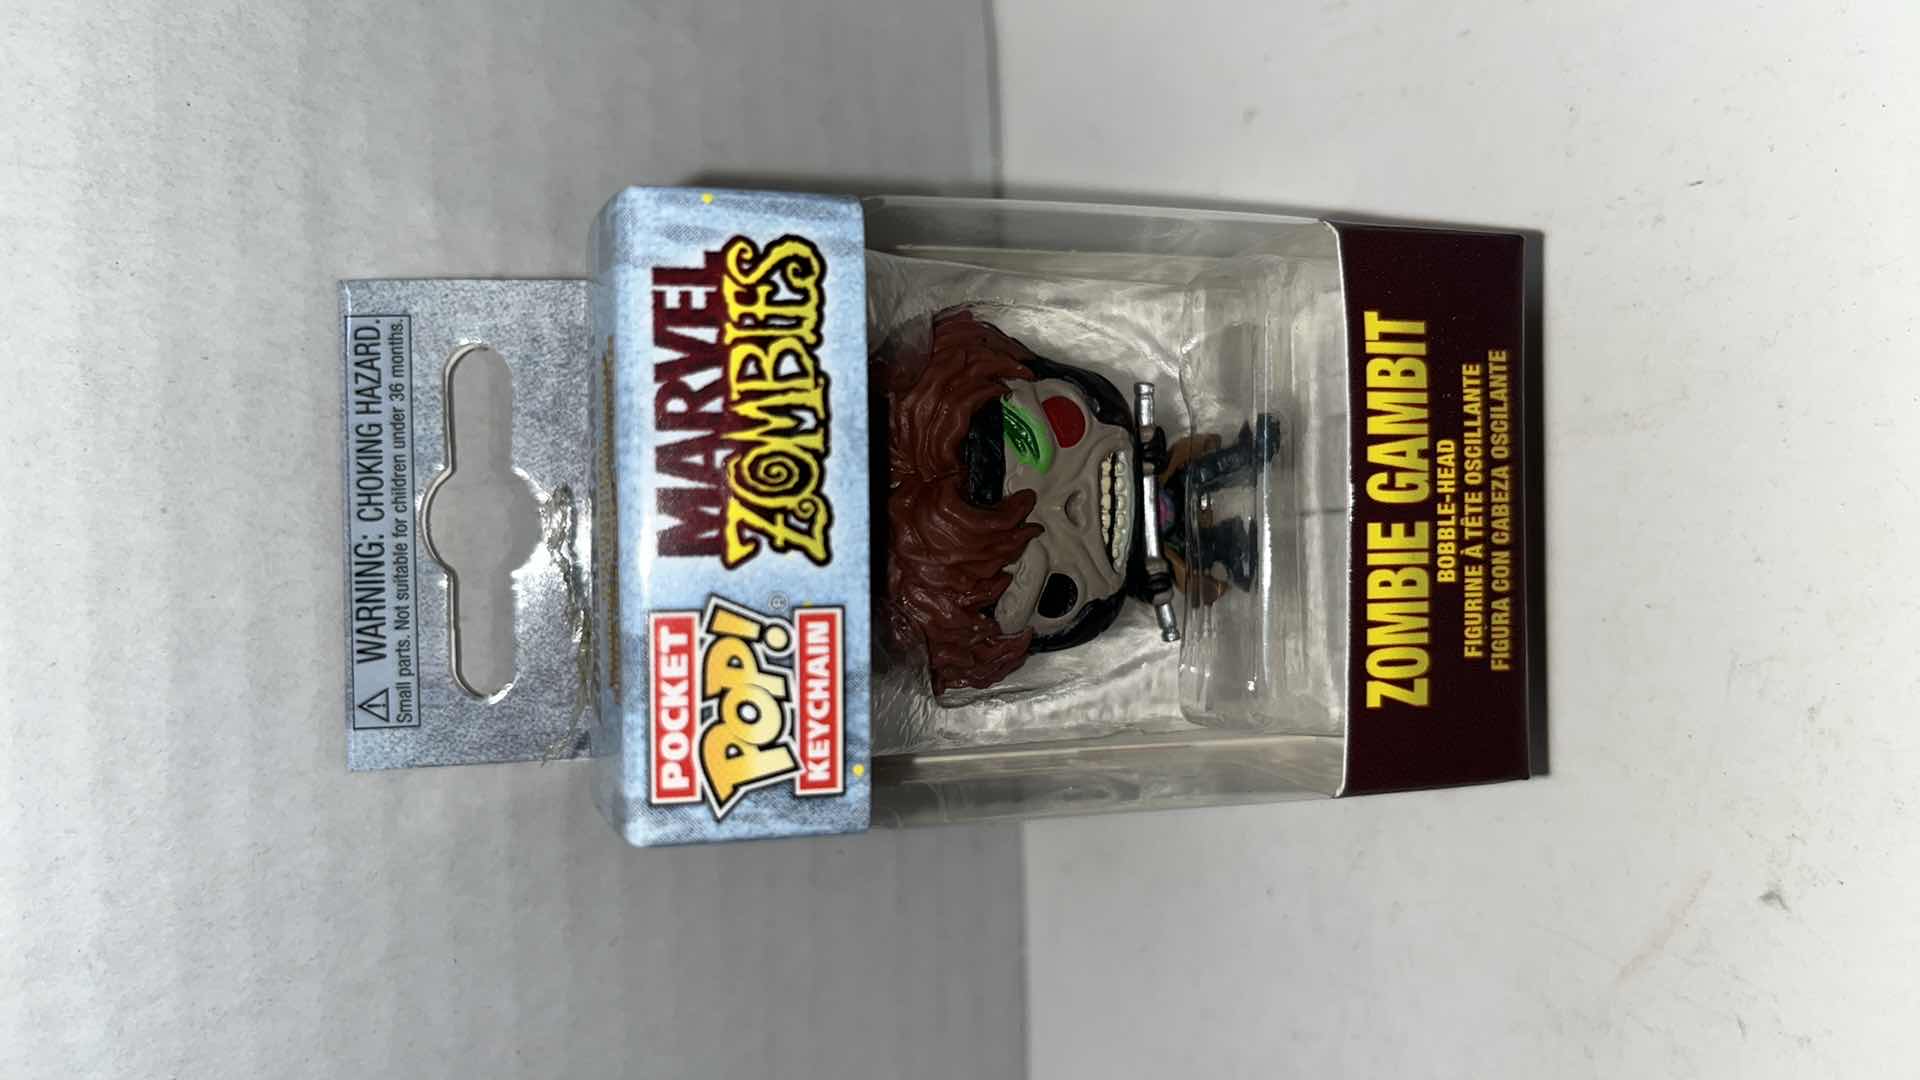 Photo 2 of NIP MARVEL STUDIOS WHAT IF? MYSTERY COLLECTORS BAG CLIPS & MARVEL ZOMBIES GAMBIT BOBBLEHEAD FUNKO POCKET POP KEY CHAIN (3)